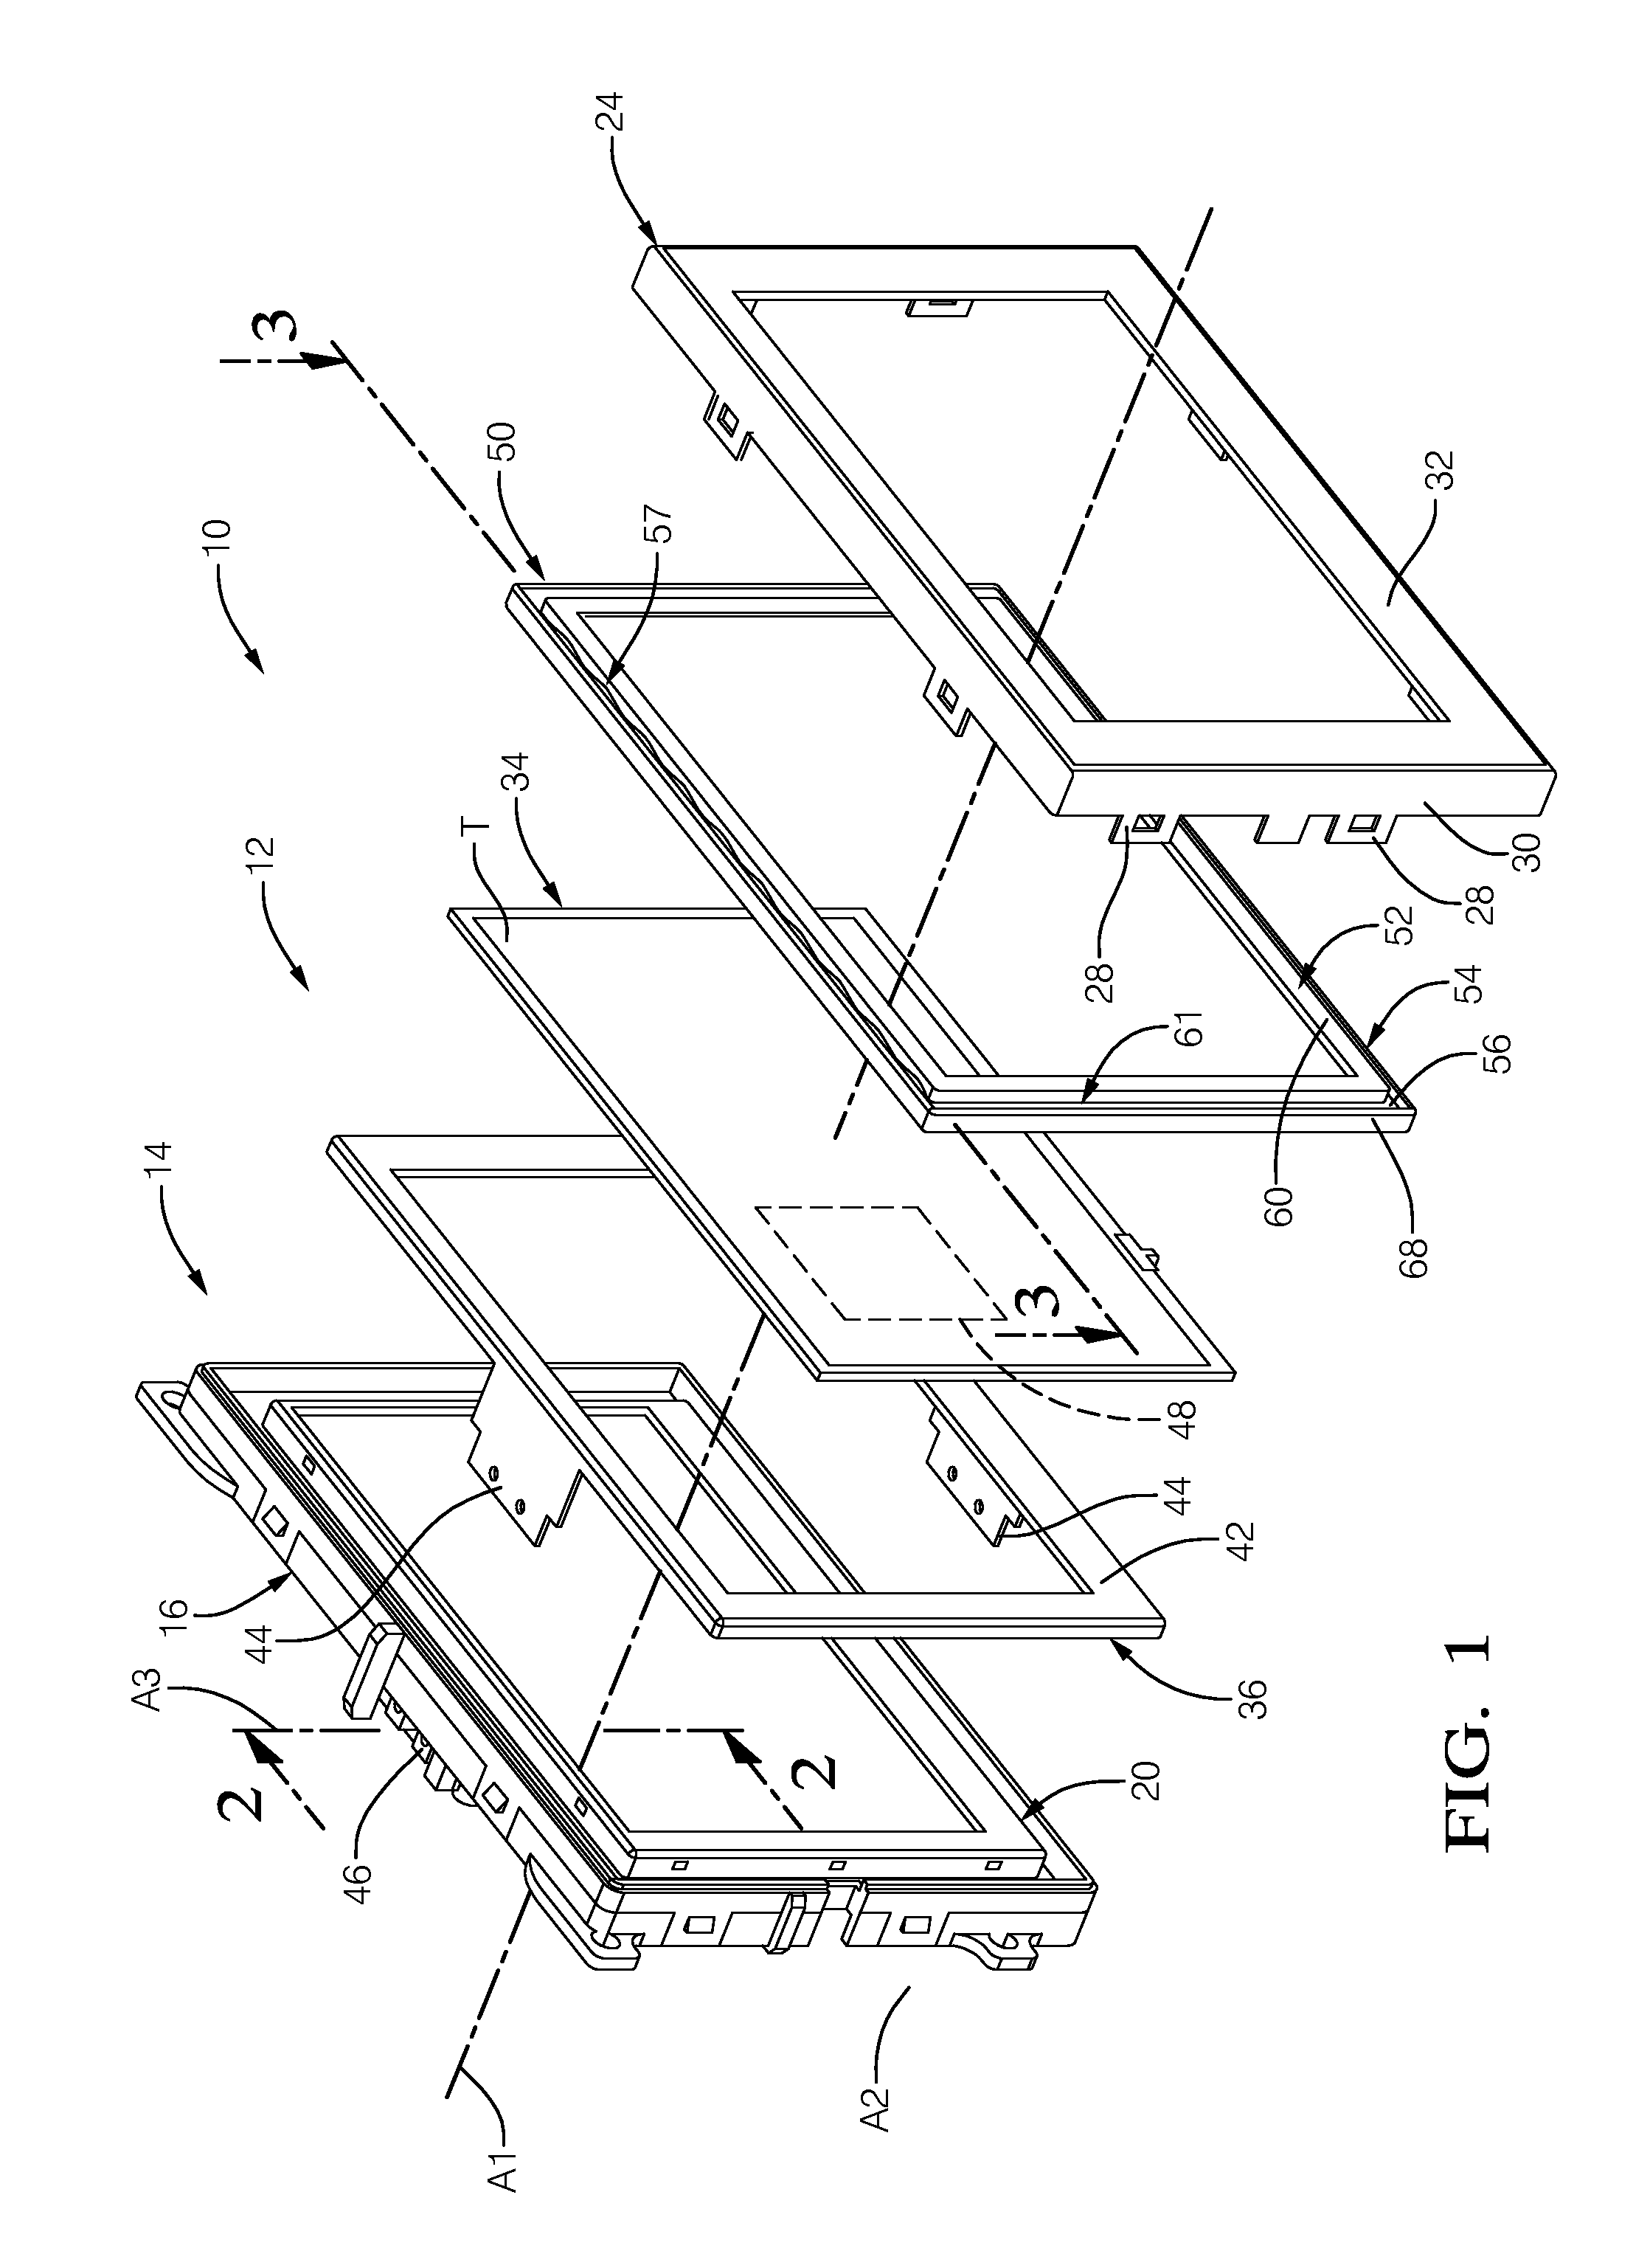 Haptic control device including a seal